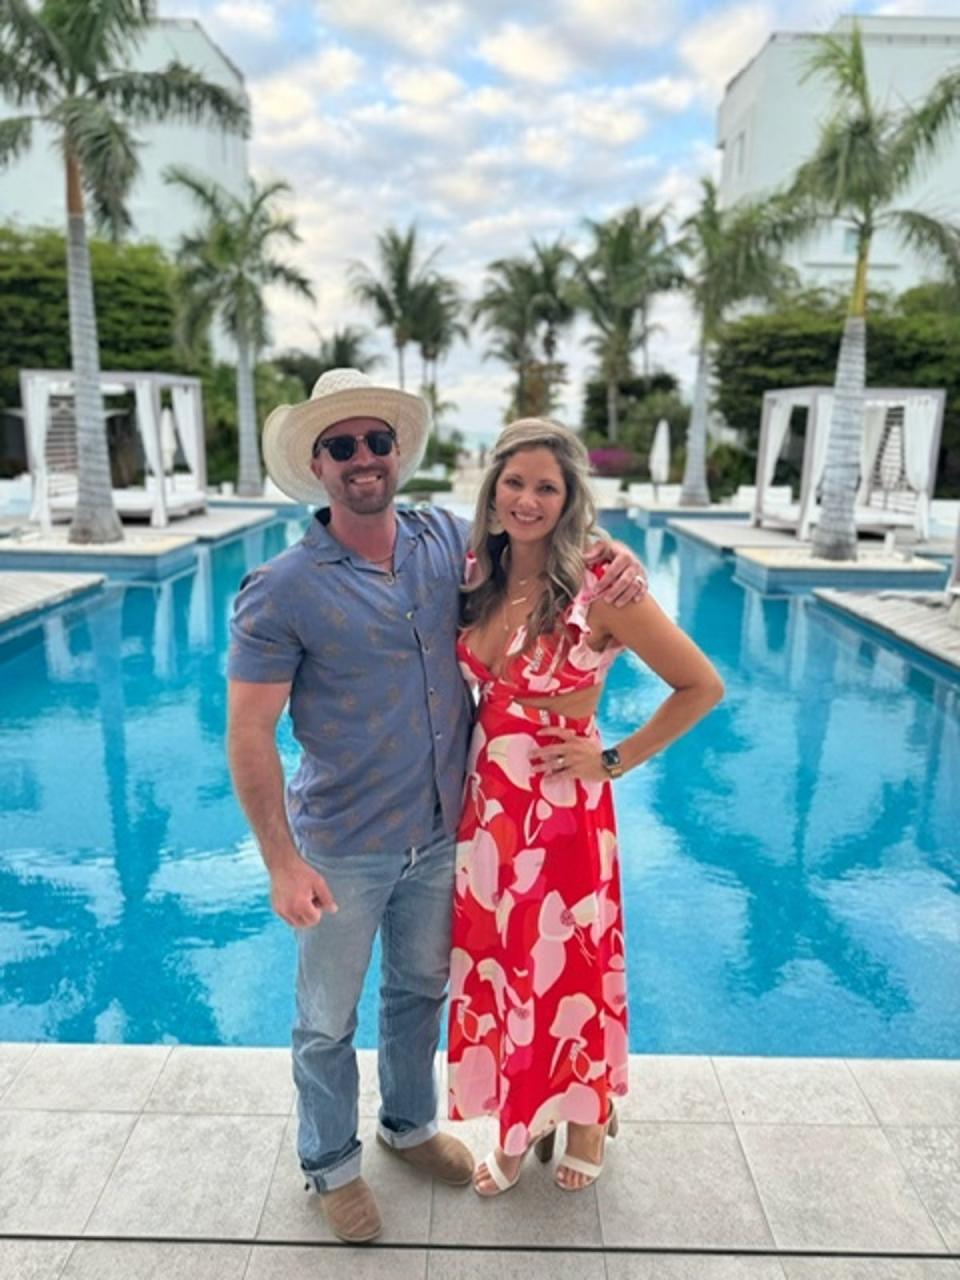 The Watsons pictured during their April vacation in Turks and Caicos. Ms Watson was released by authorities on the island, but her husband must remain there until his trial in June (Valerie Watson)